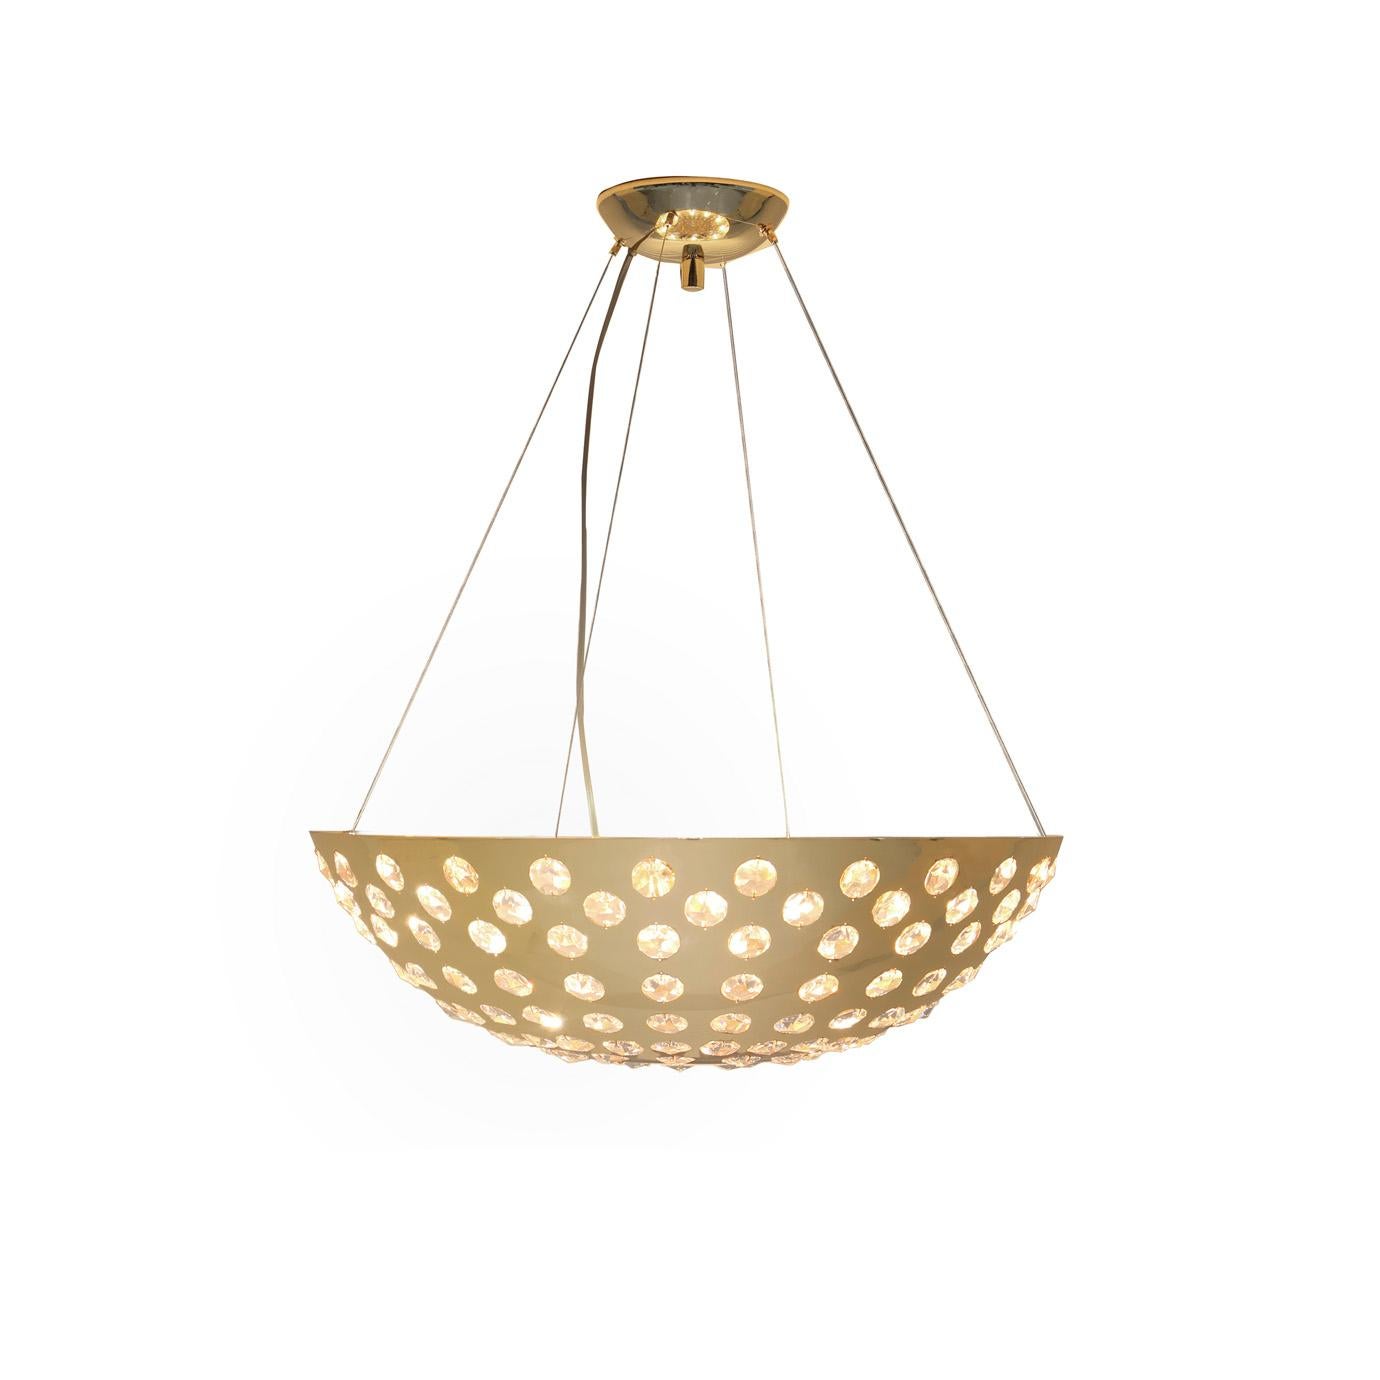 The flawless round brilliance of the Kasehsiah chandelier evokes an alluring visceral pleasure at first glance. A satin semi-sphere is sprinkled with sparkling crystal droplets adding a touch of elegant femininity to this modern chandelier.